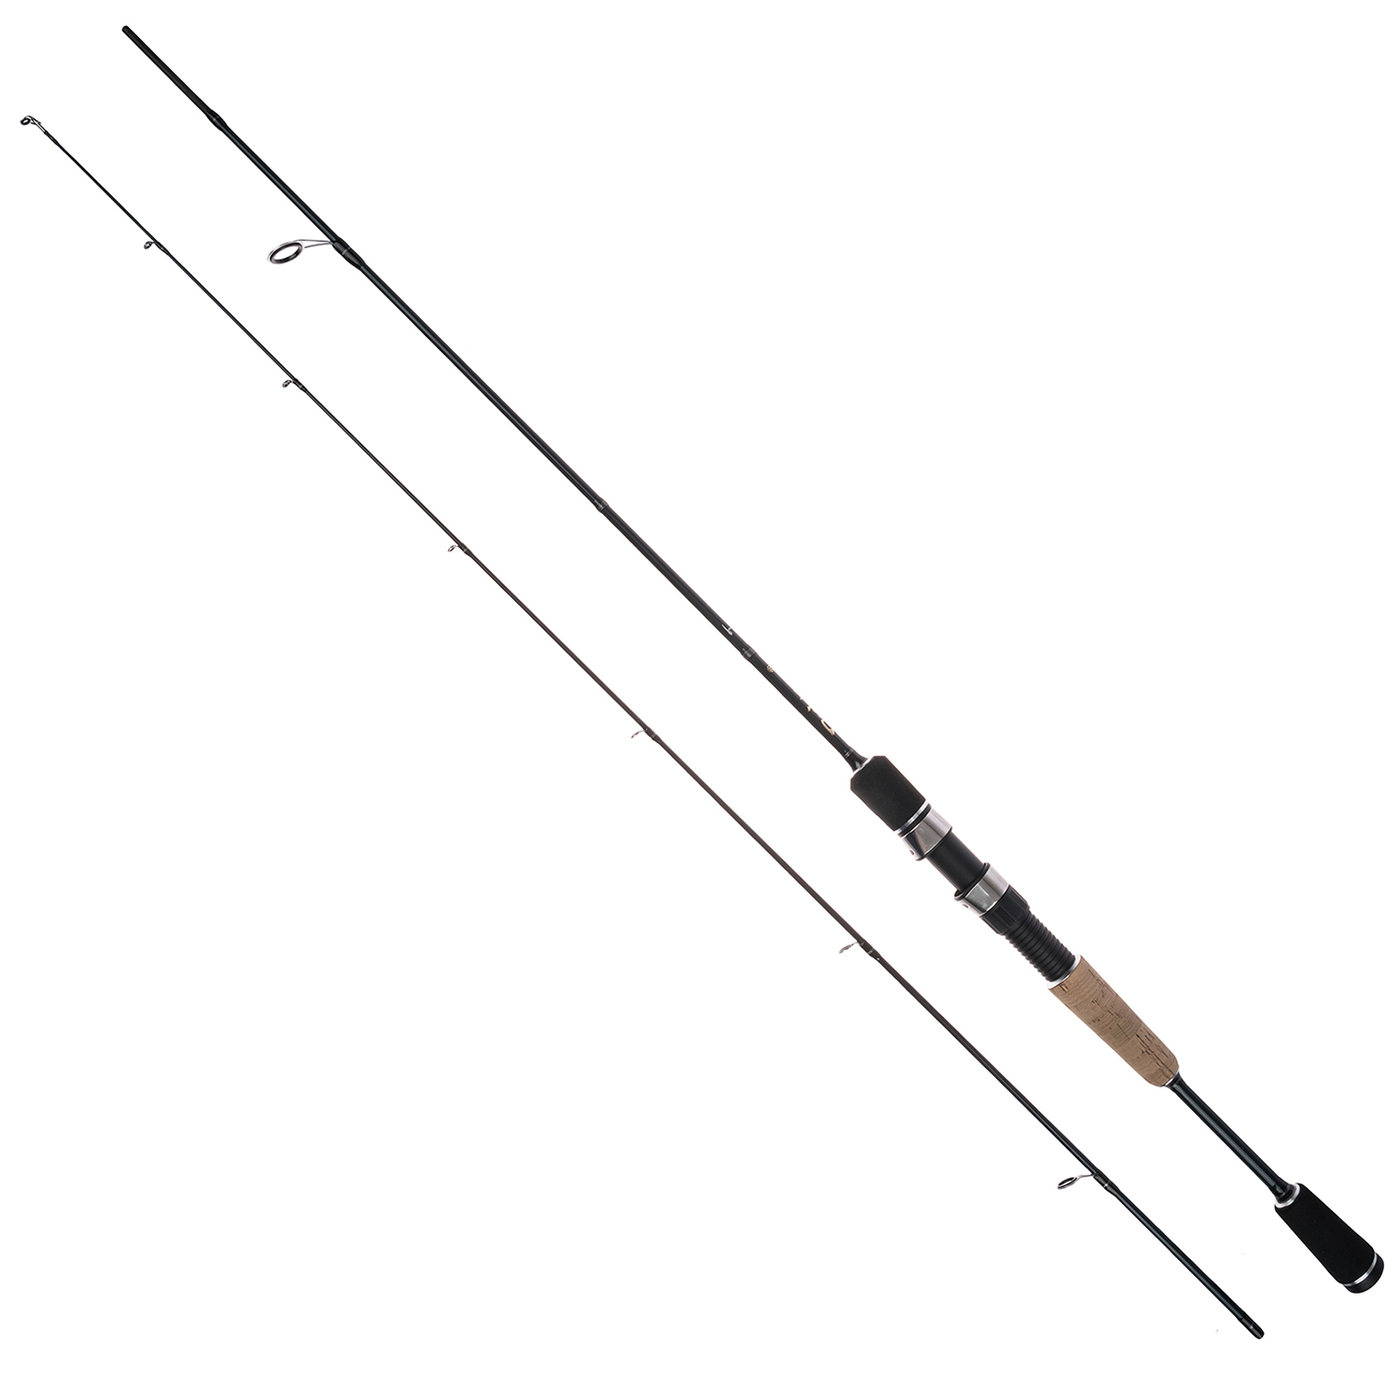 Удилище Rubicon Trout 1333-195, 1,95 м, extra fast, 1-5 г